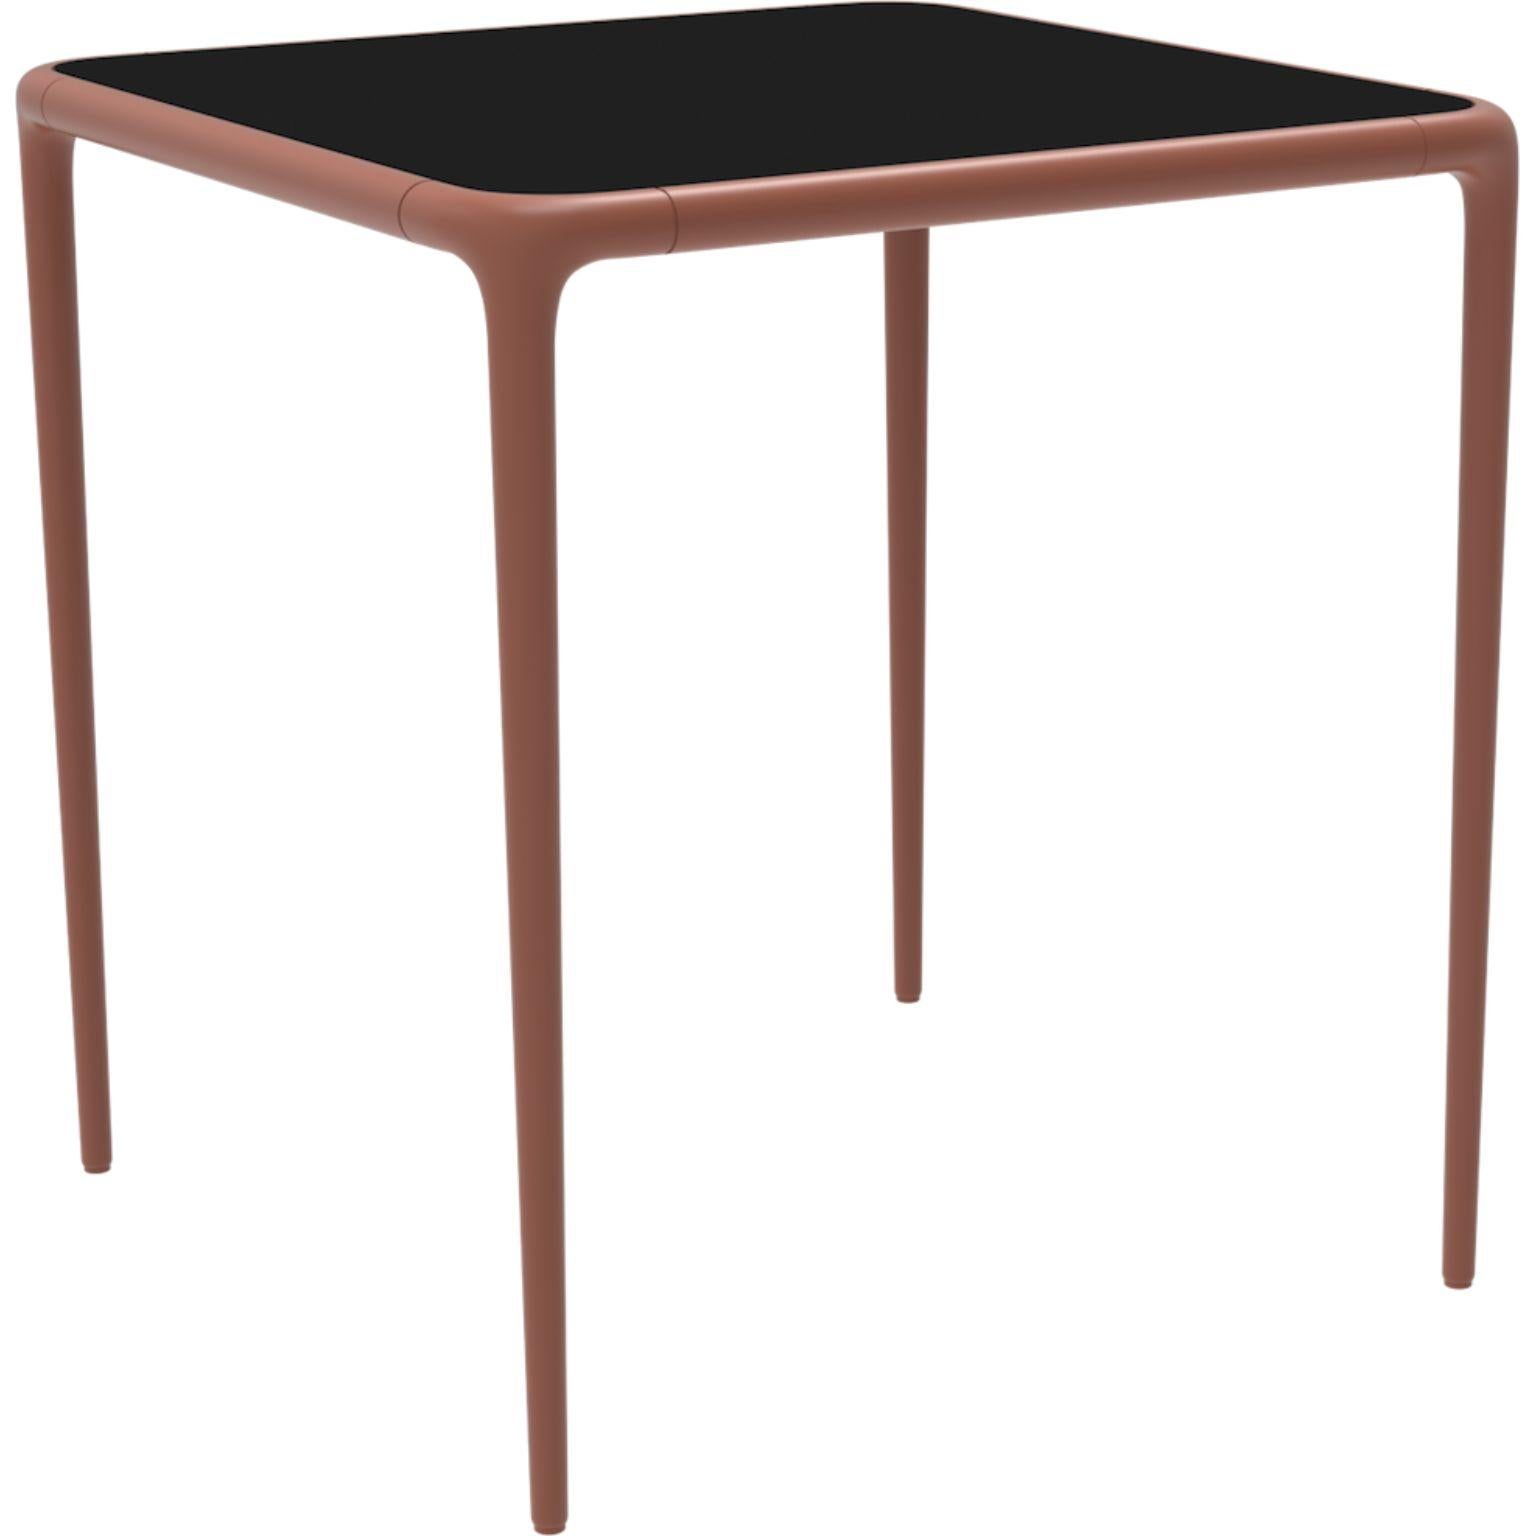 Xaloc Salmon glass top table 70 by MOWEE
Dimensions: D70 x W70 x H74 cm
Material: Aluminum, tinted tempered glass top.
Also available in different aluminum colors and finishes (HPL Black Edge or Neolith).

Xaloc synthesizes the lines of